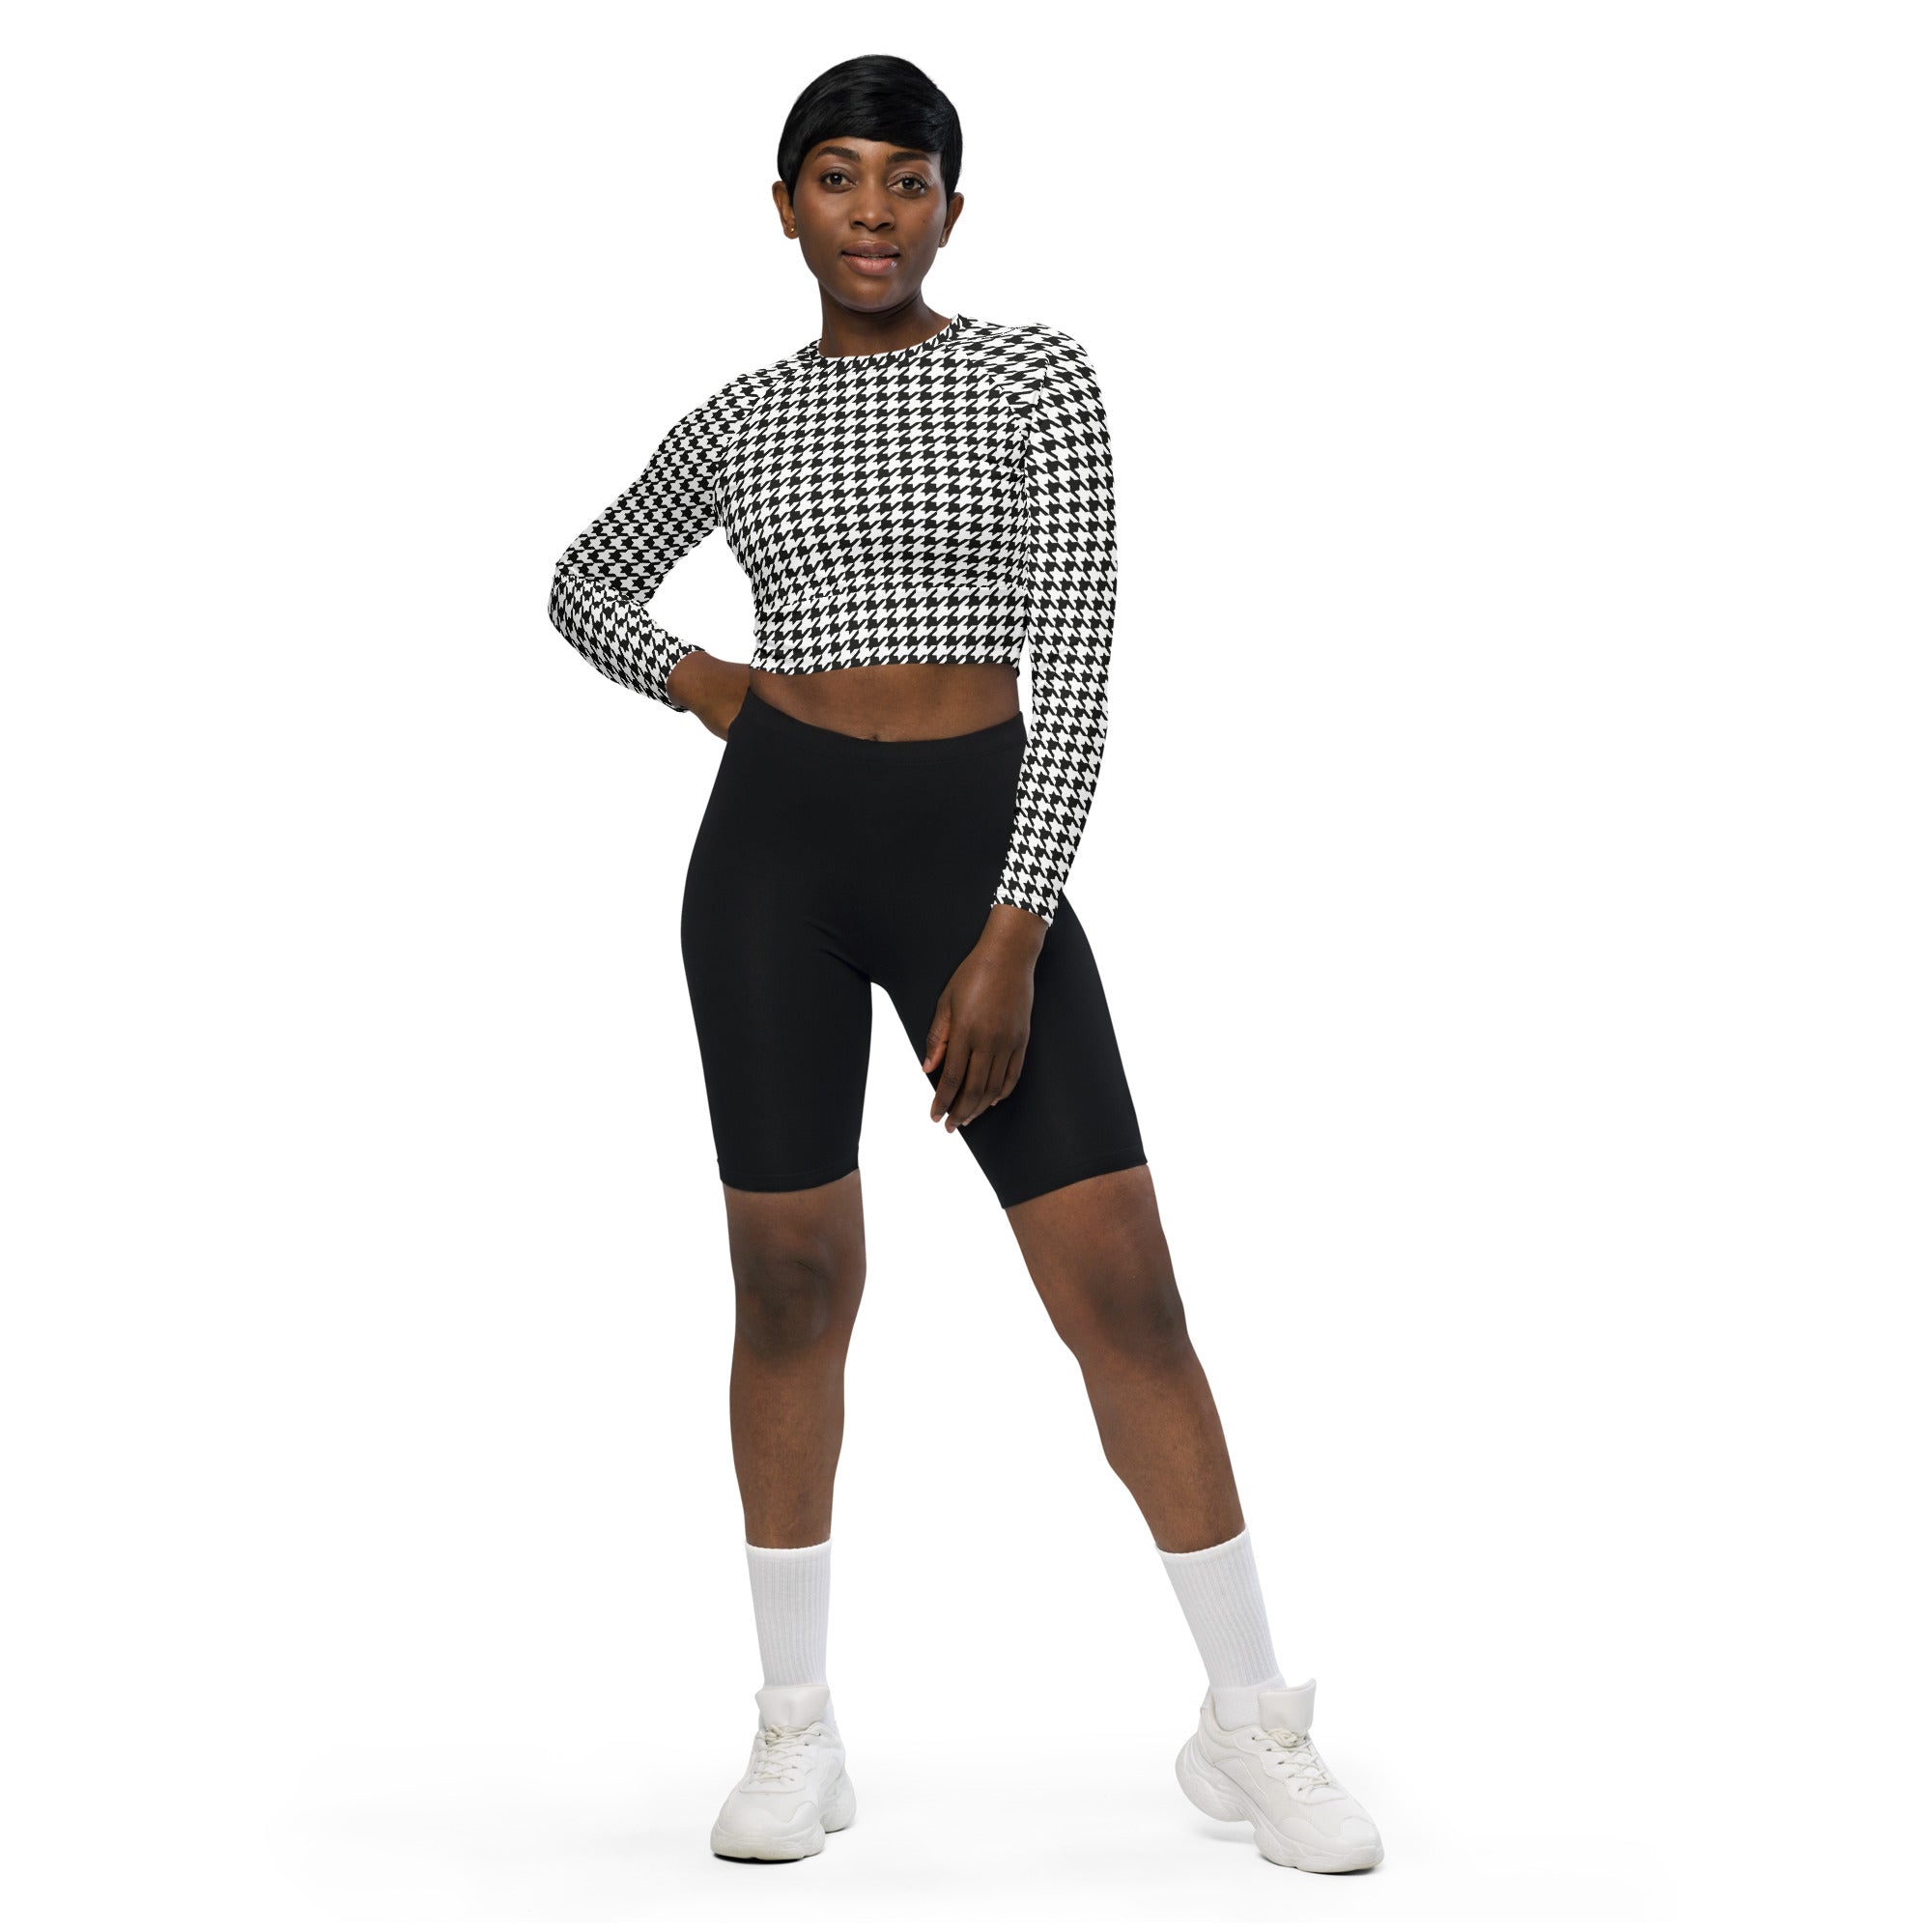 Black & White Houndstooth Print Recycled Long-sleeve Crop Top